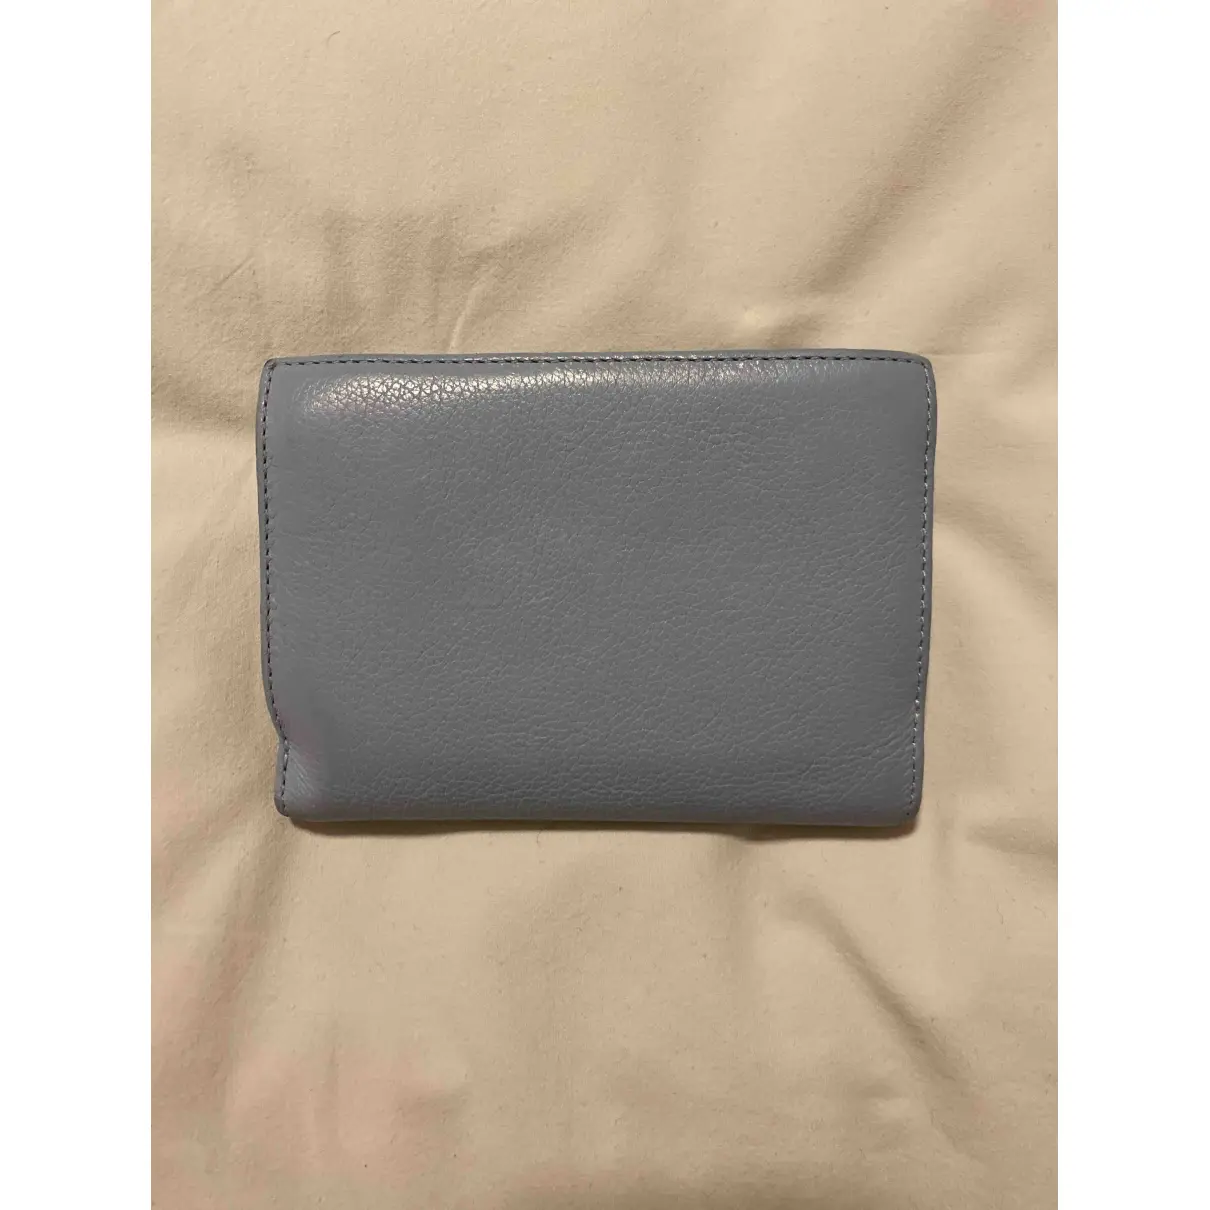 Buy Coccinelle Leather purse online